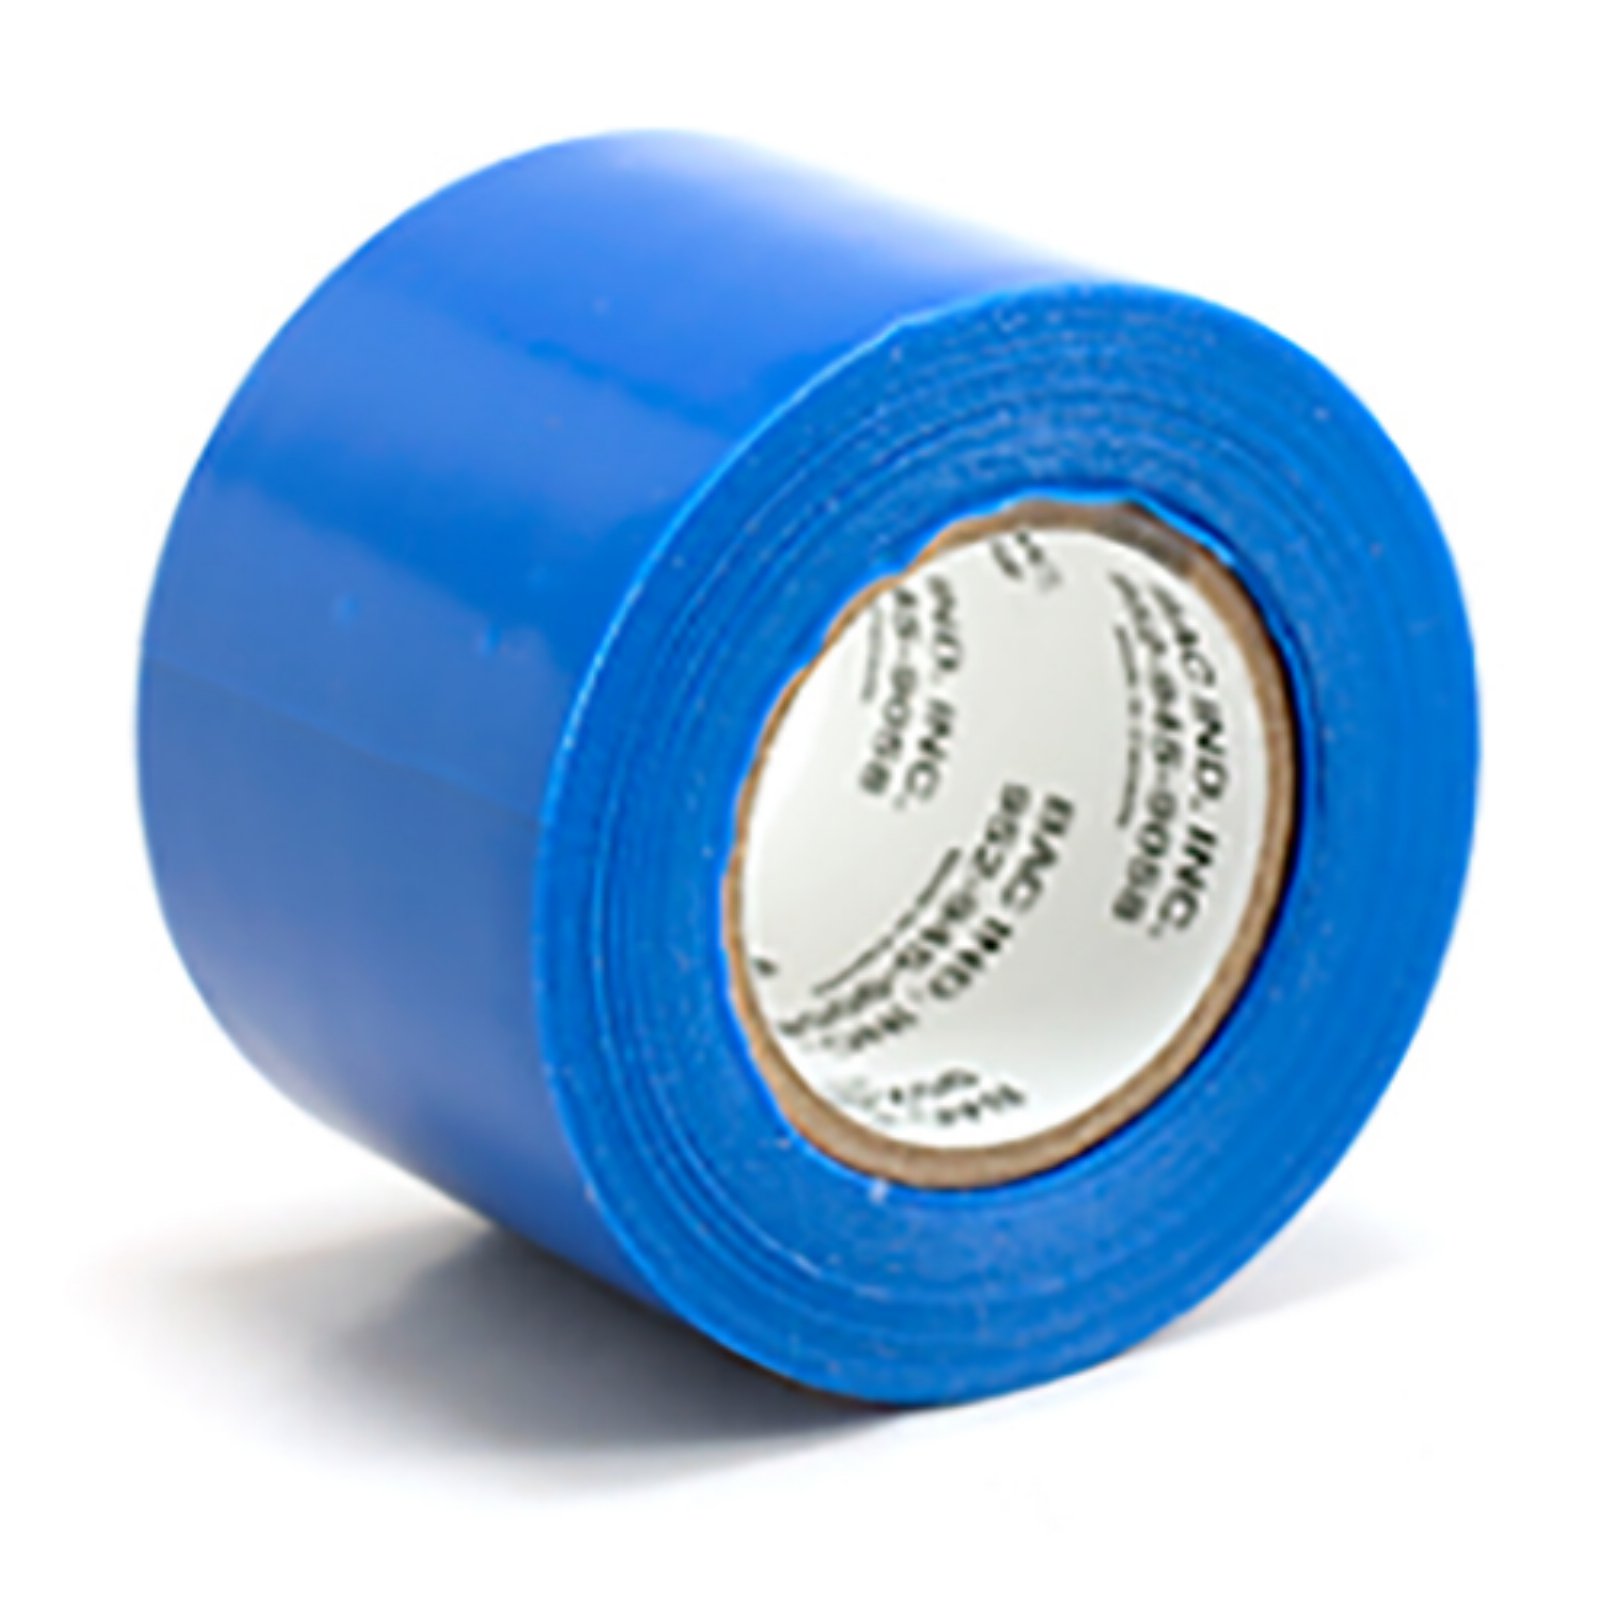 King Canopy Tarp Tape Large Black - 3 inch x 108 ft Roll - image 2 of 4